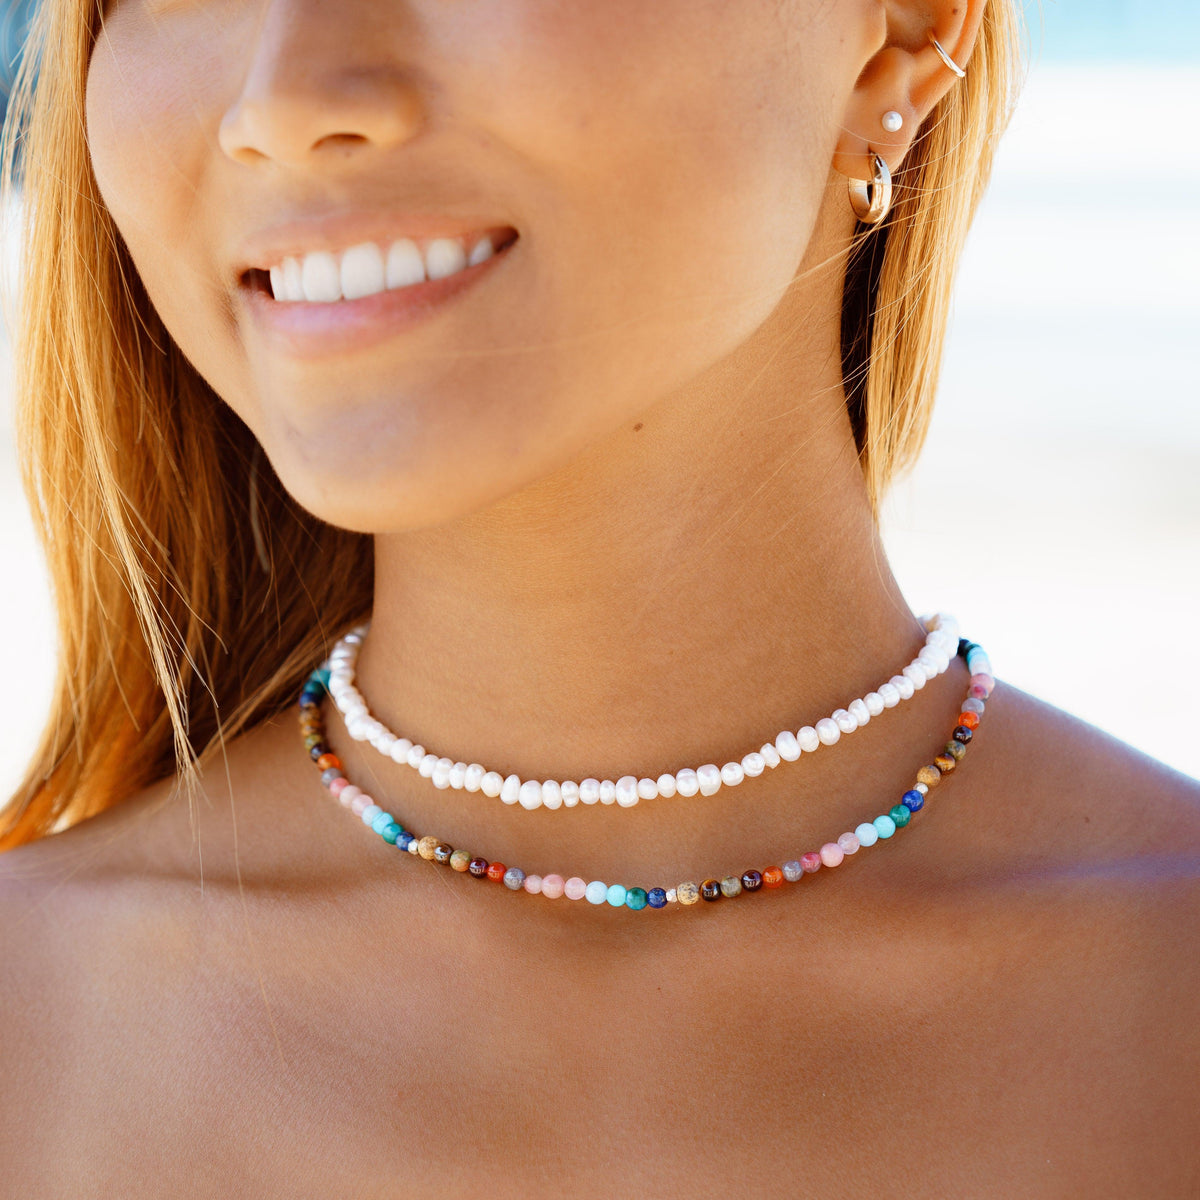 Model wearing a stack of two healing necklaces. The necklaces include a pearl healing necklace and a 4mm multicolor stone healing necklace